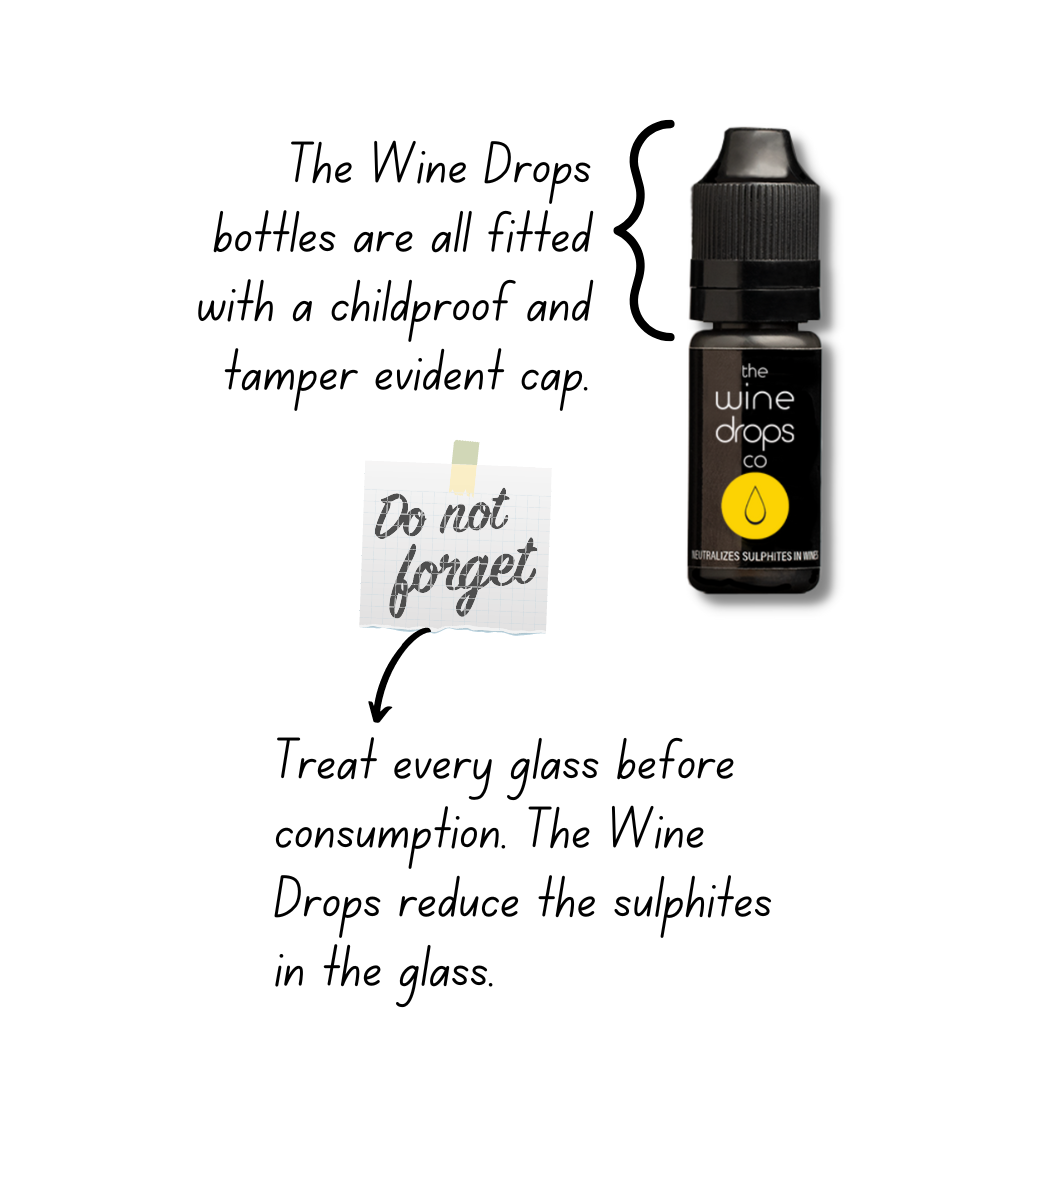 Drop It wine drops review: How to reduce sulfites in wine - Reviewed